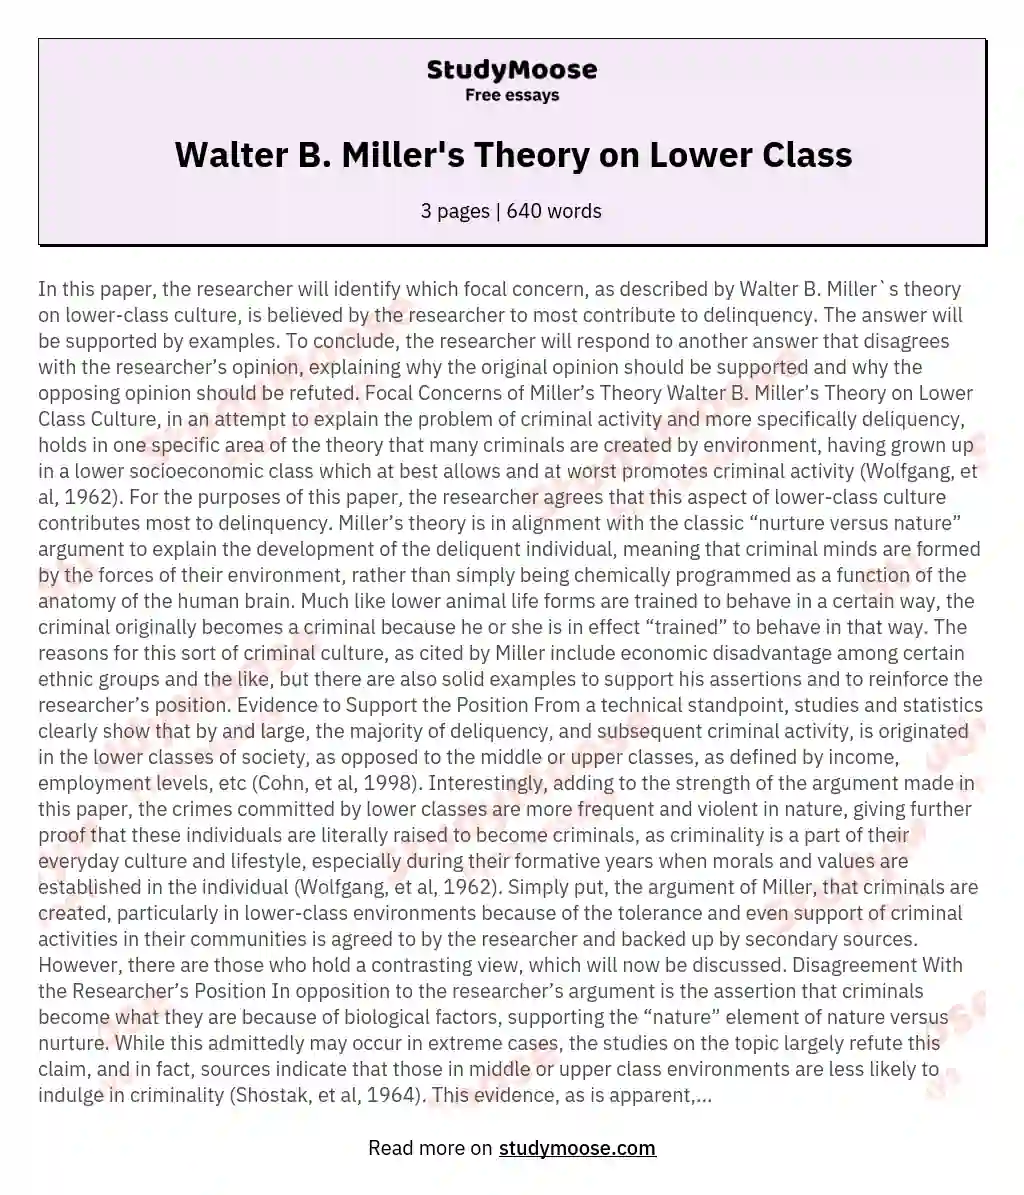 Walter B. Miller's Theory on Lower Class essay